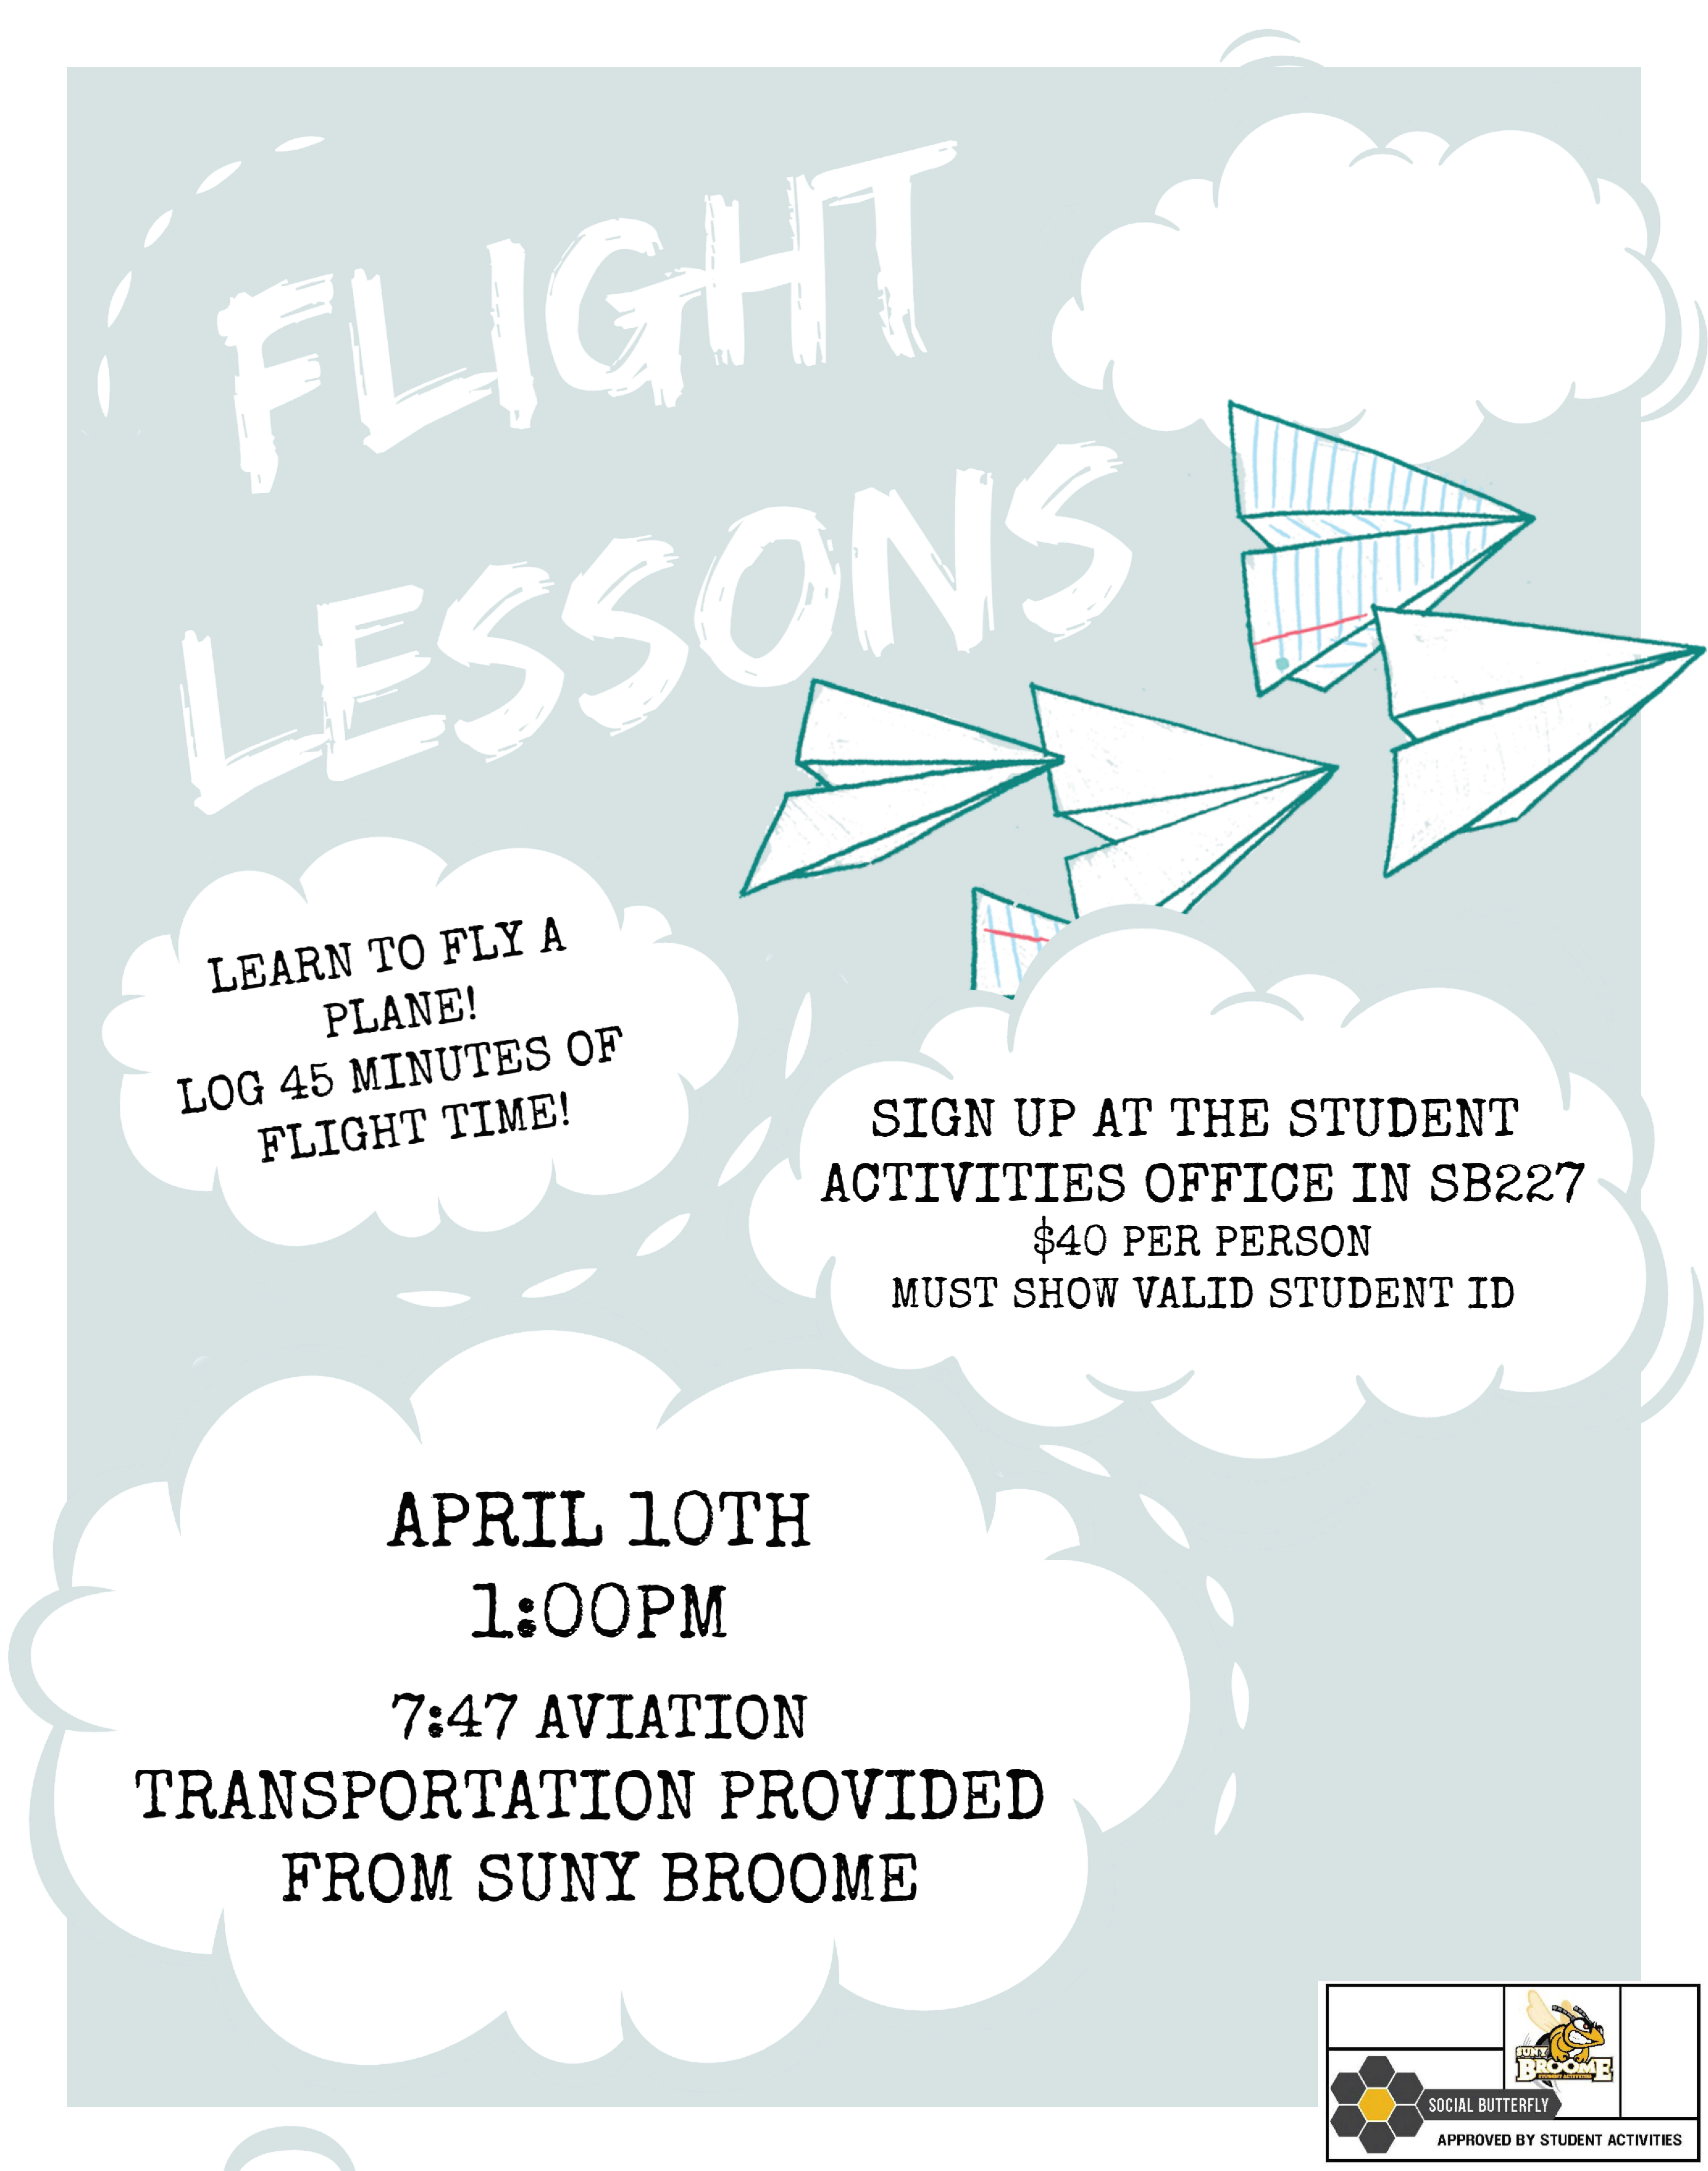 Learn to fly a plane on April 10